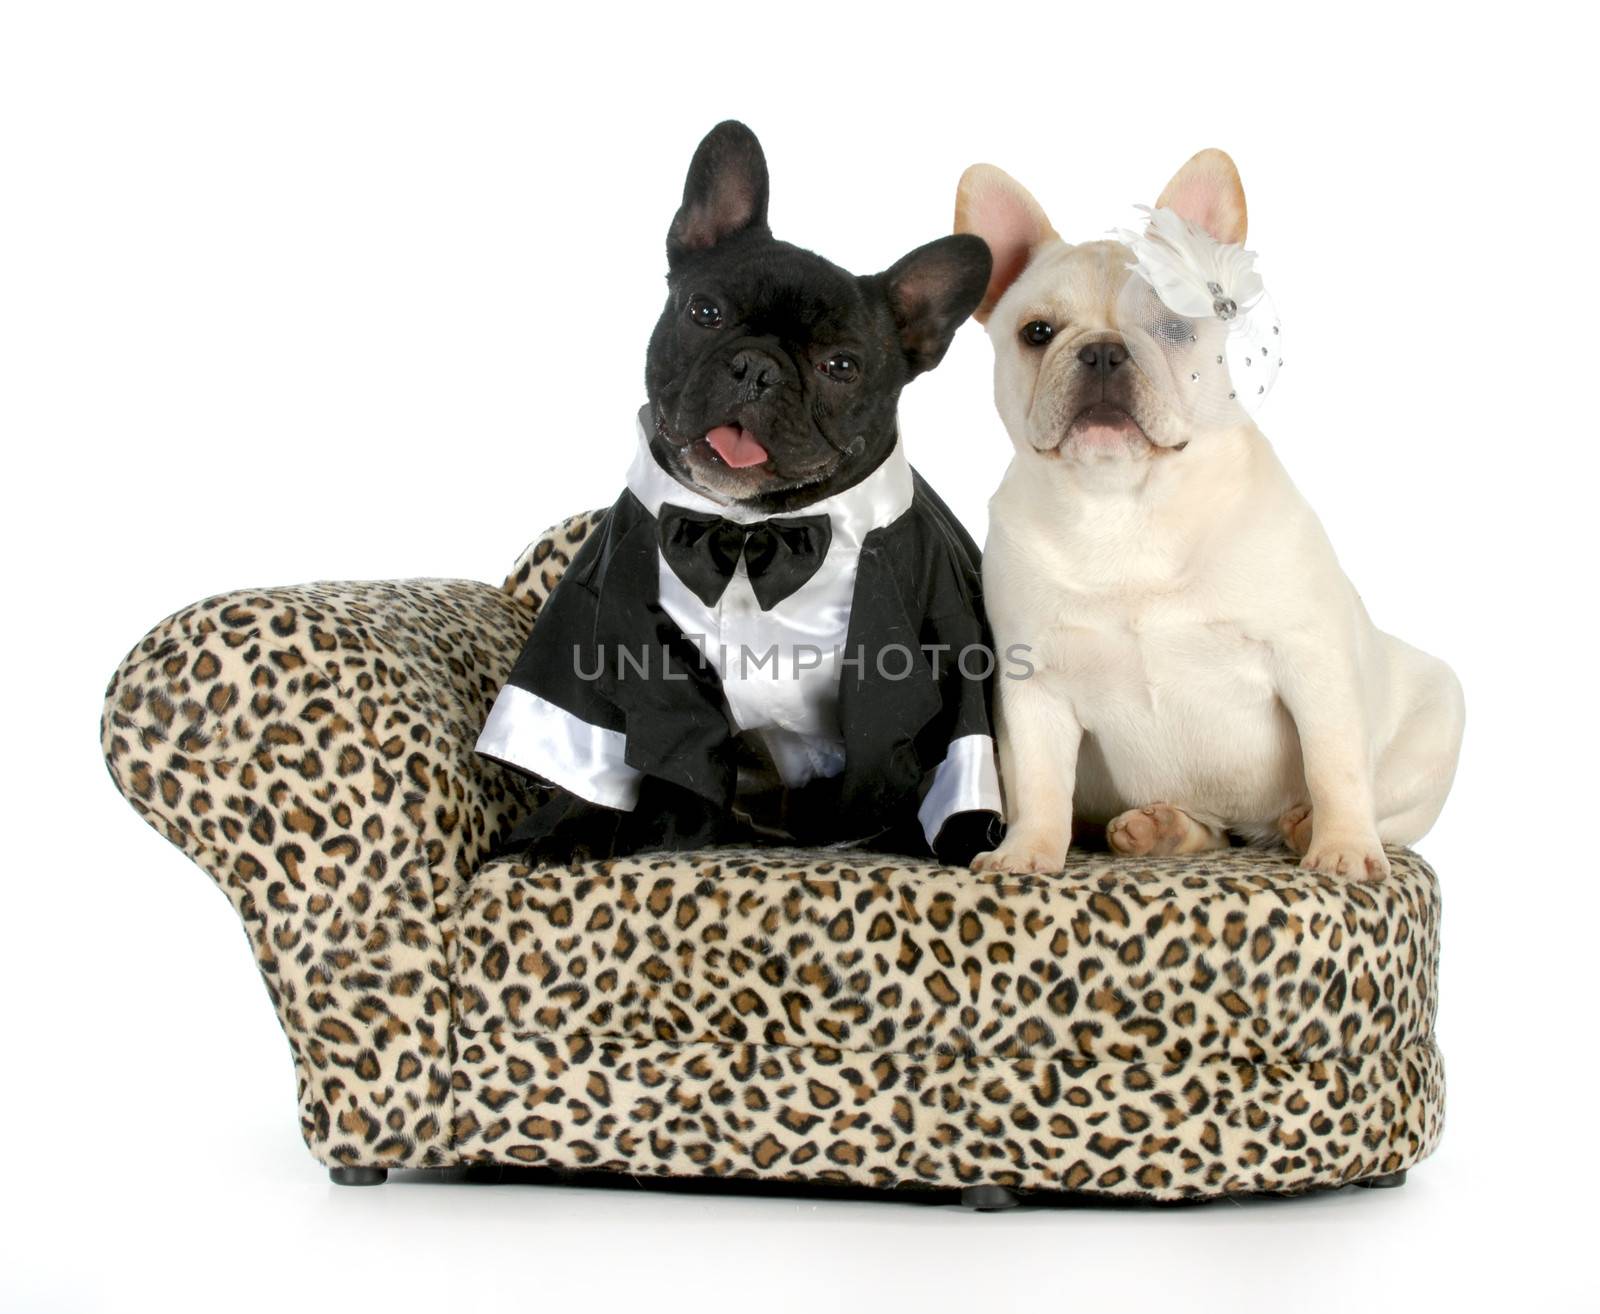 dog couple - french bulldogs dressed up like a man and woman isolated on white background